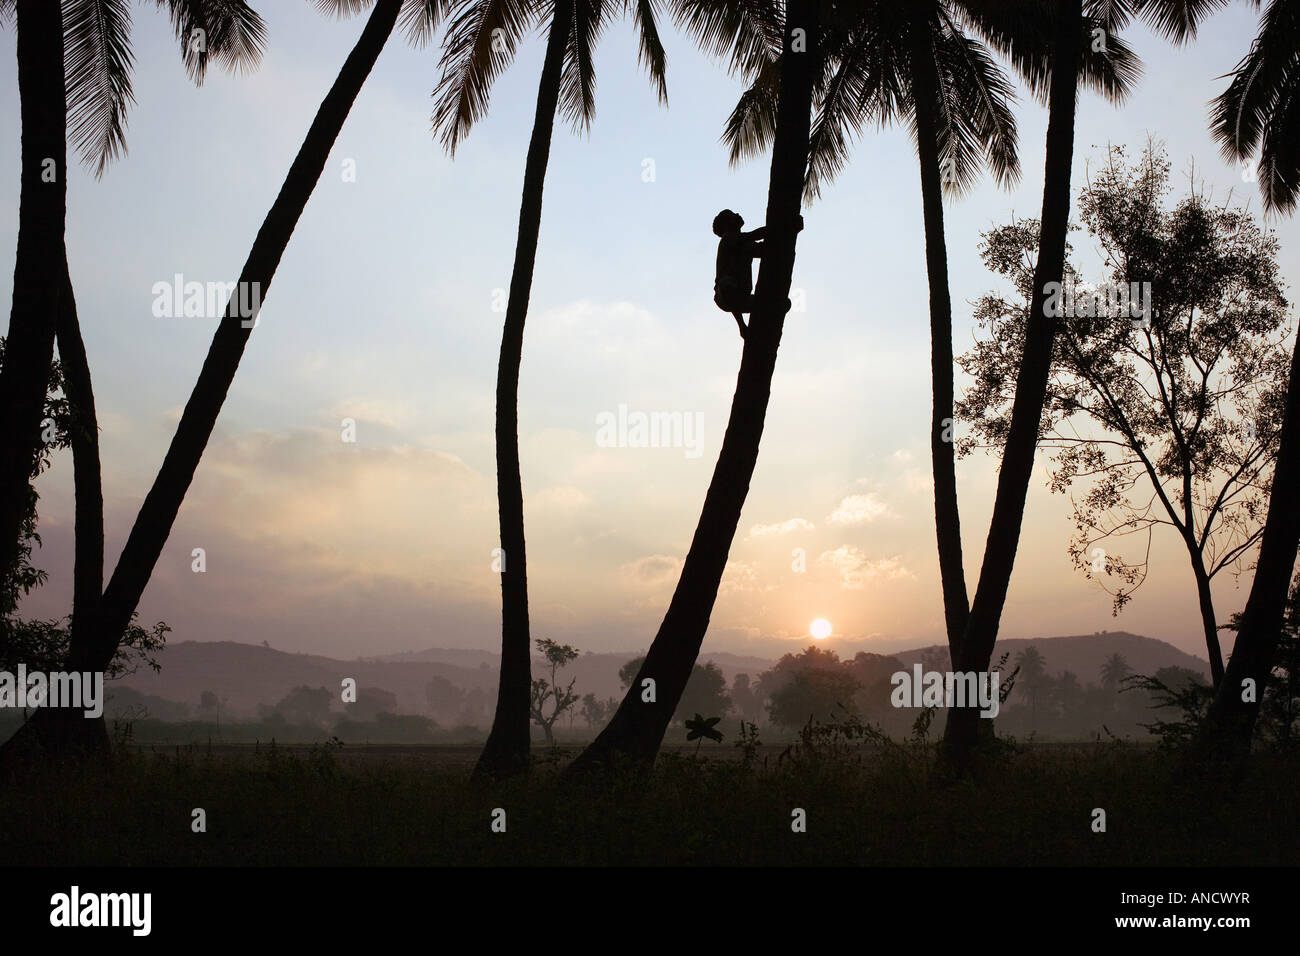 Silhouette of an Indian man climbing a coconut tree Stock Photo